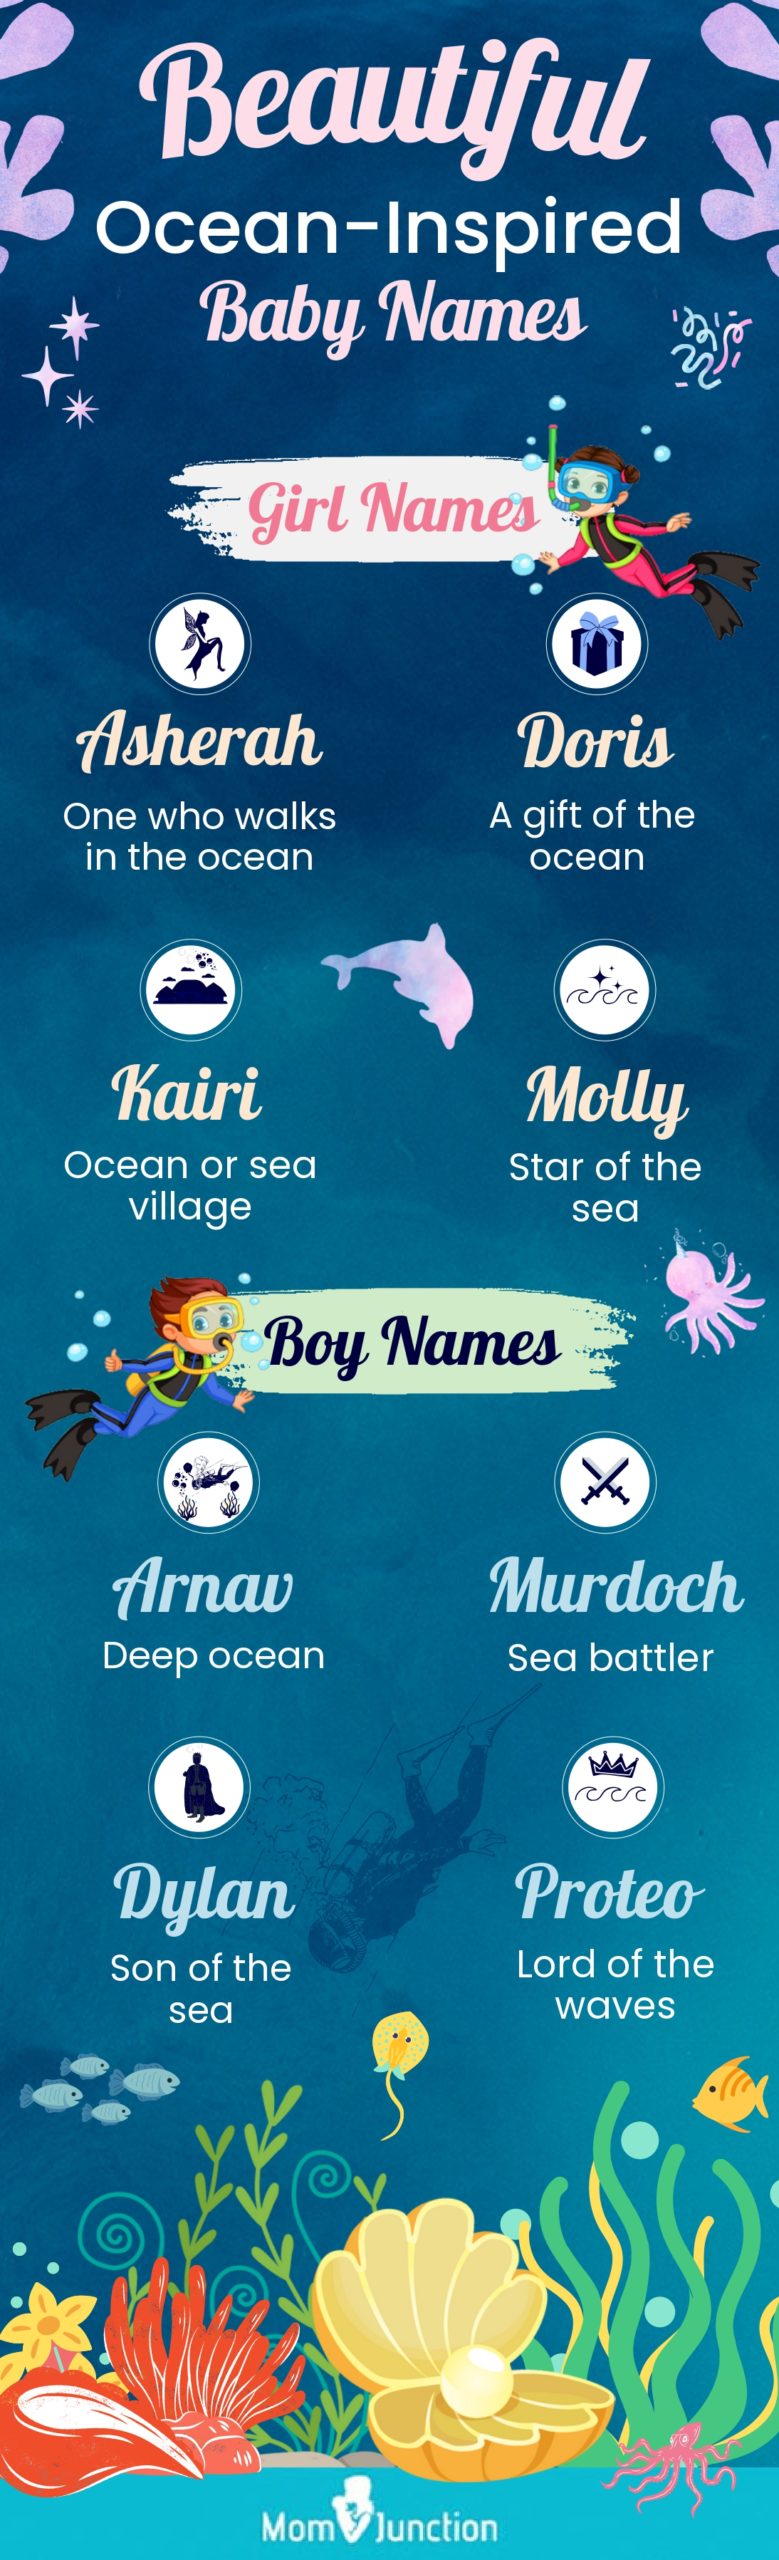 beautiful ocean inspired baby names (infographic)